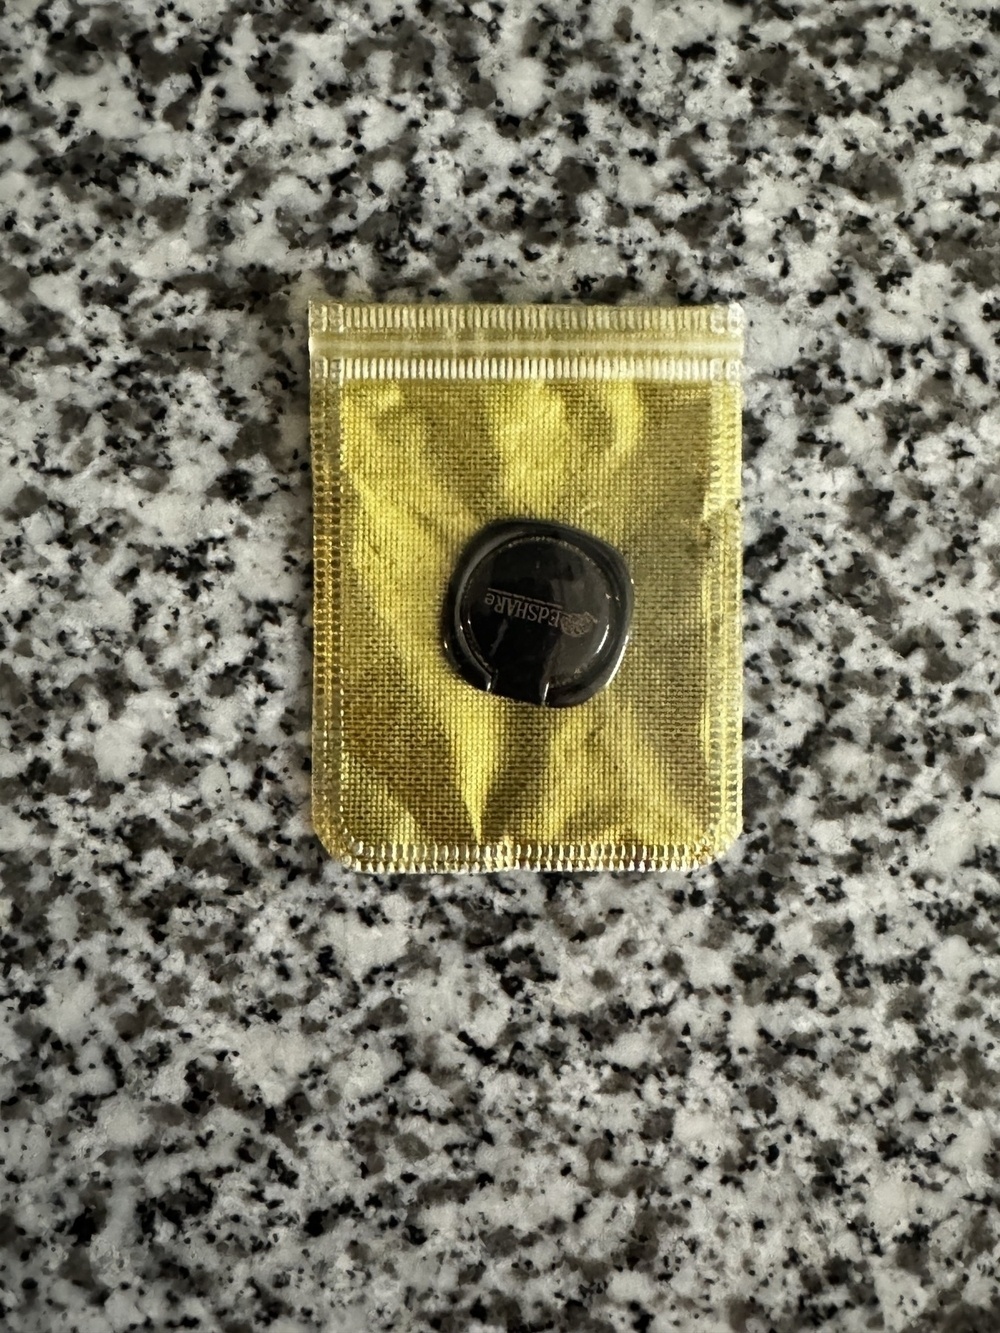 A sealed gold-colored wrapper rests on a speckled counter, containing a circular object embossed with text.